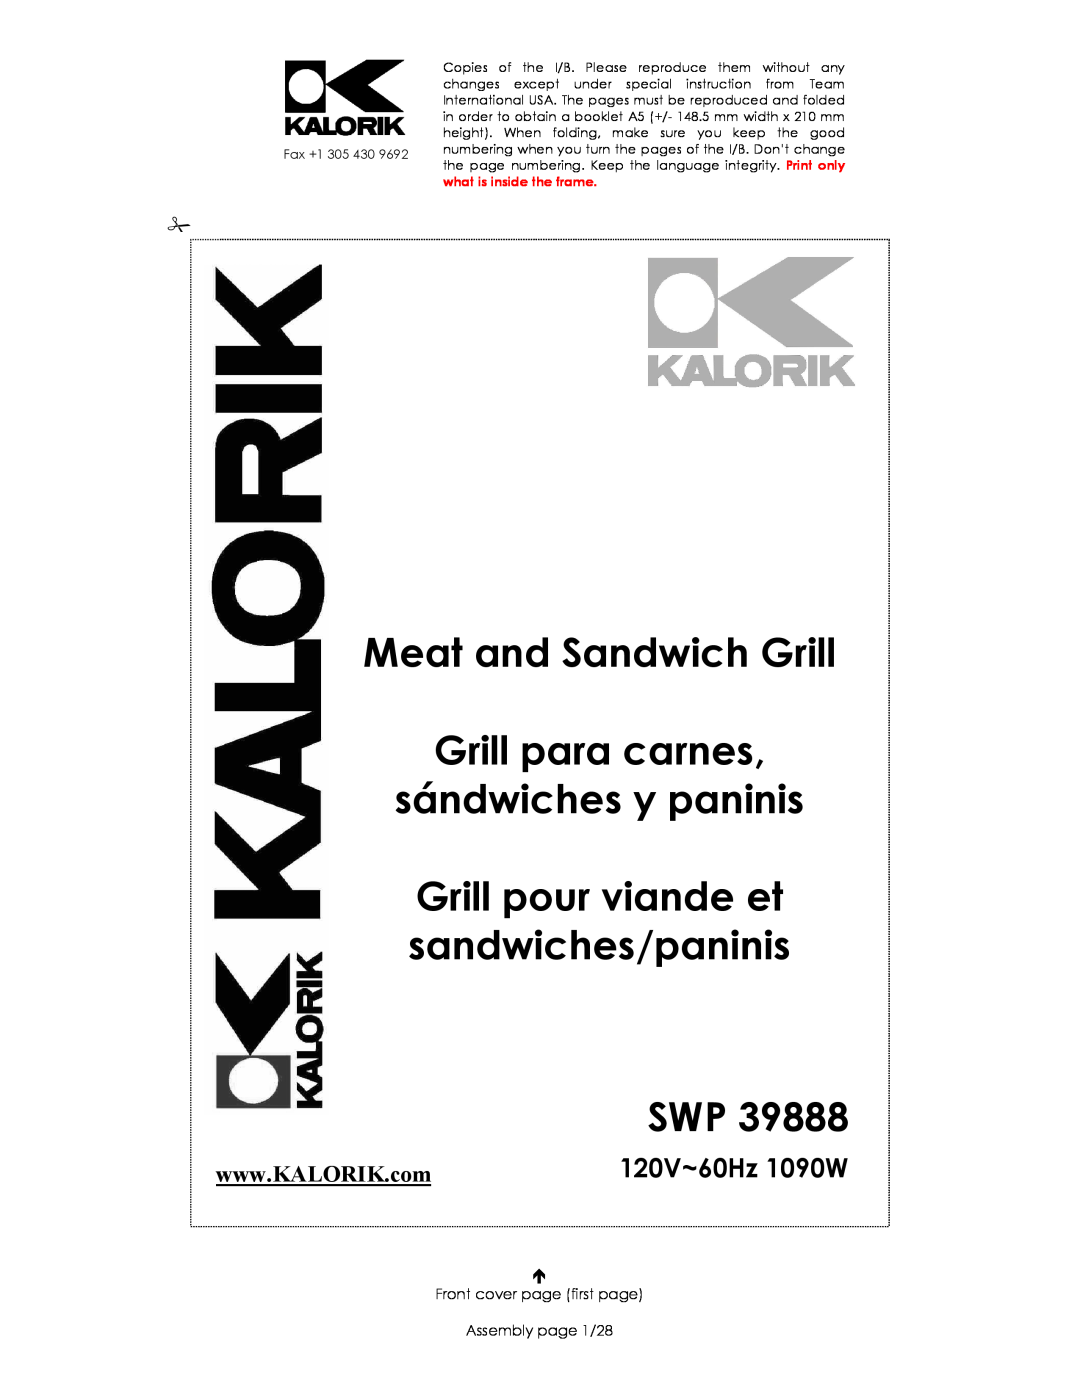 Kalorik SWP 39888 manual Meat and Sandwich Grill Grill para carnes, sándwiches y paninis, 120V~60Hz 1090W 